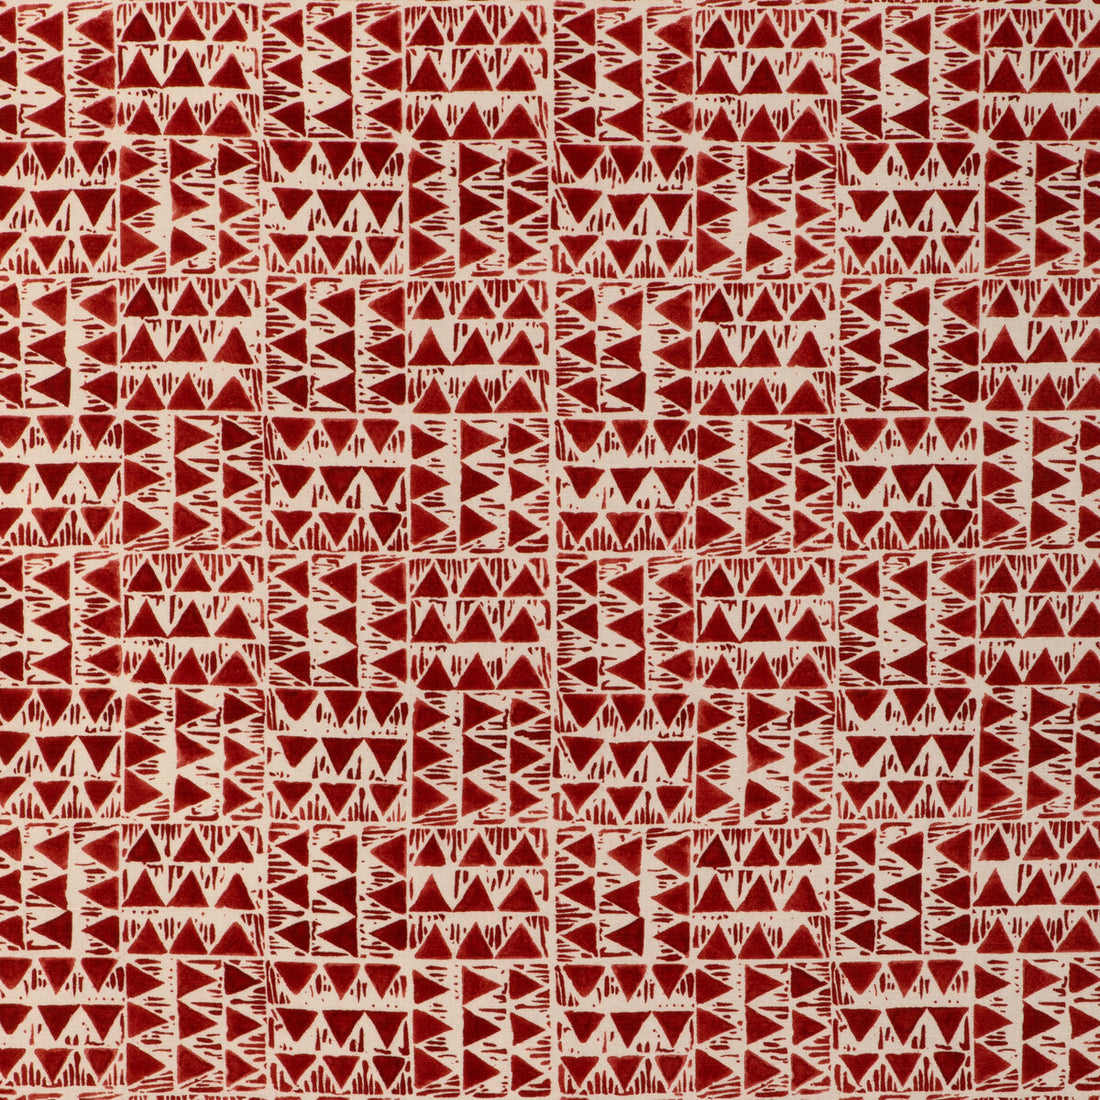 Yampa Print fabric in ruby color - pattern 2020210.19.0 - by Lee Jofa in the Clare Prints collection